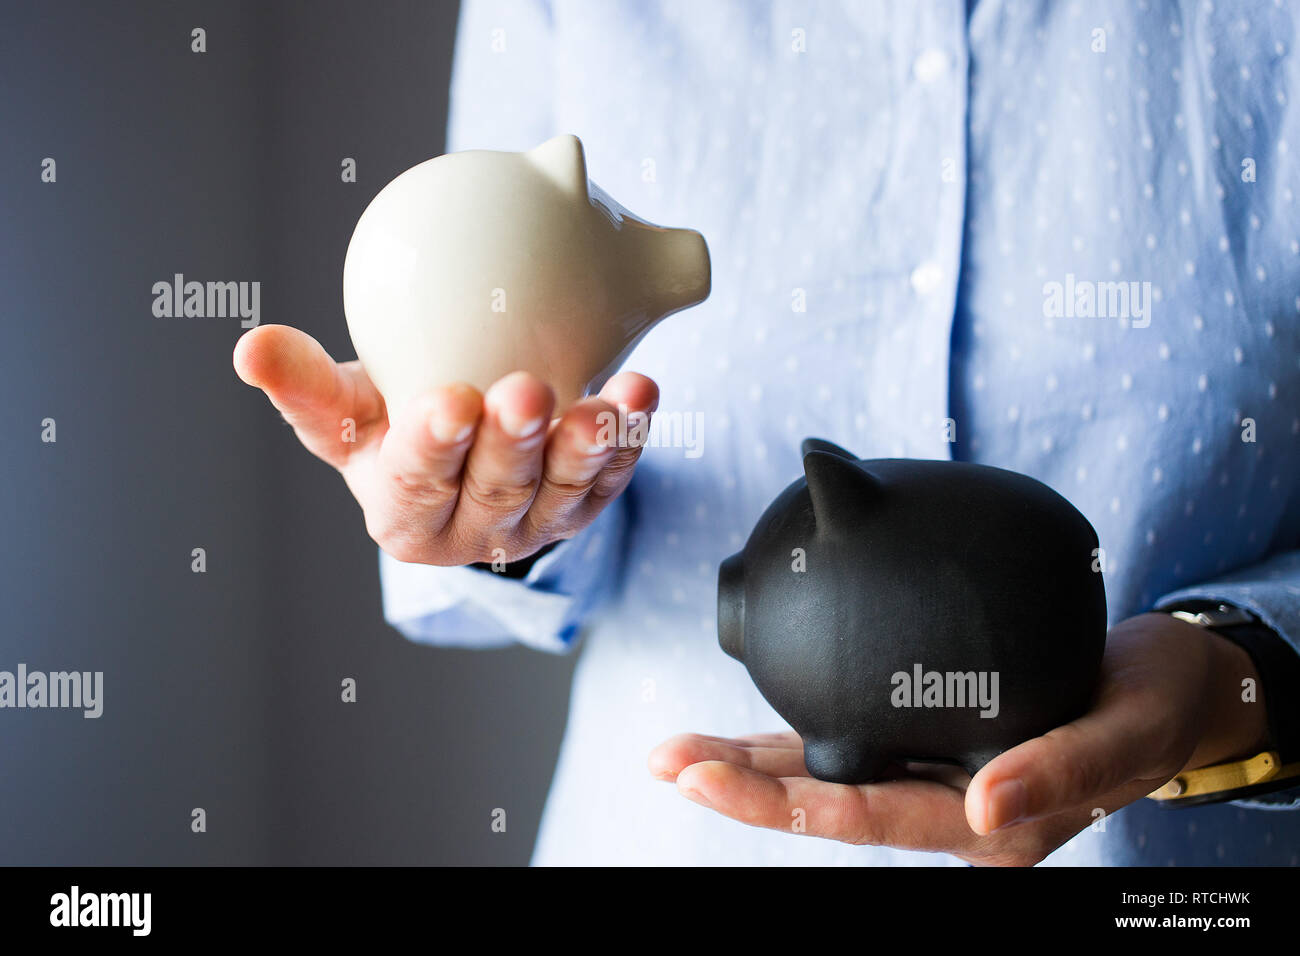 Person holds two piggy banks, white is smaller and lighter, black is bigger and heavier, like savings vs debt Stock Photo